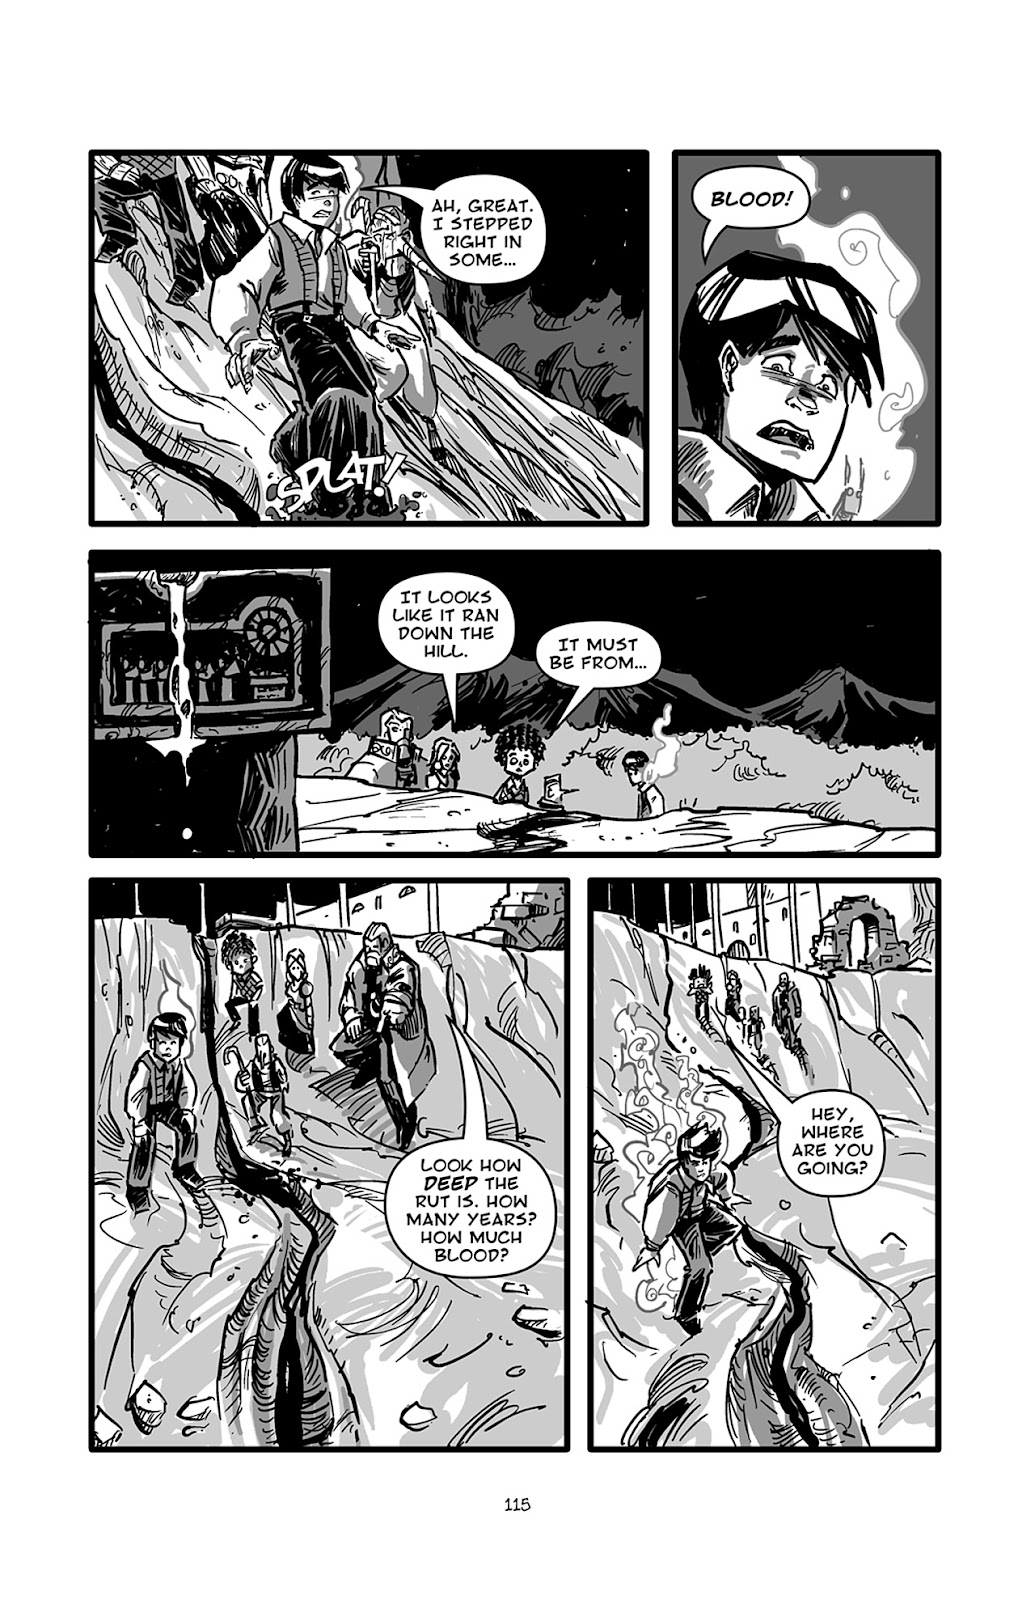 Pinocchio: Vampire Slayer - Of Wood and Blood issue 5 - Page 16